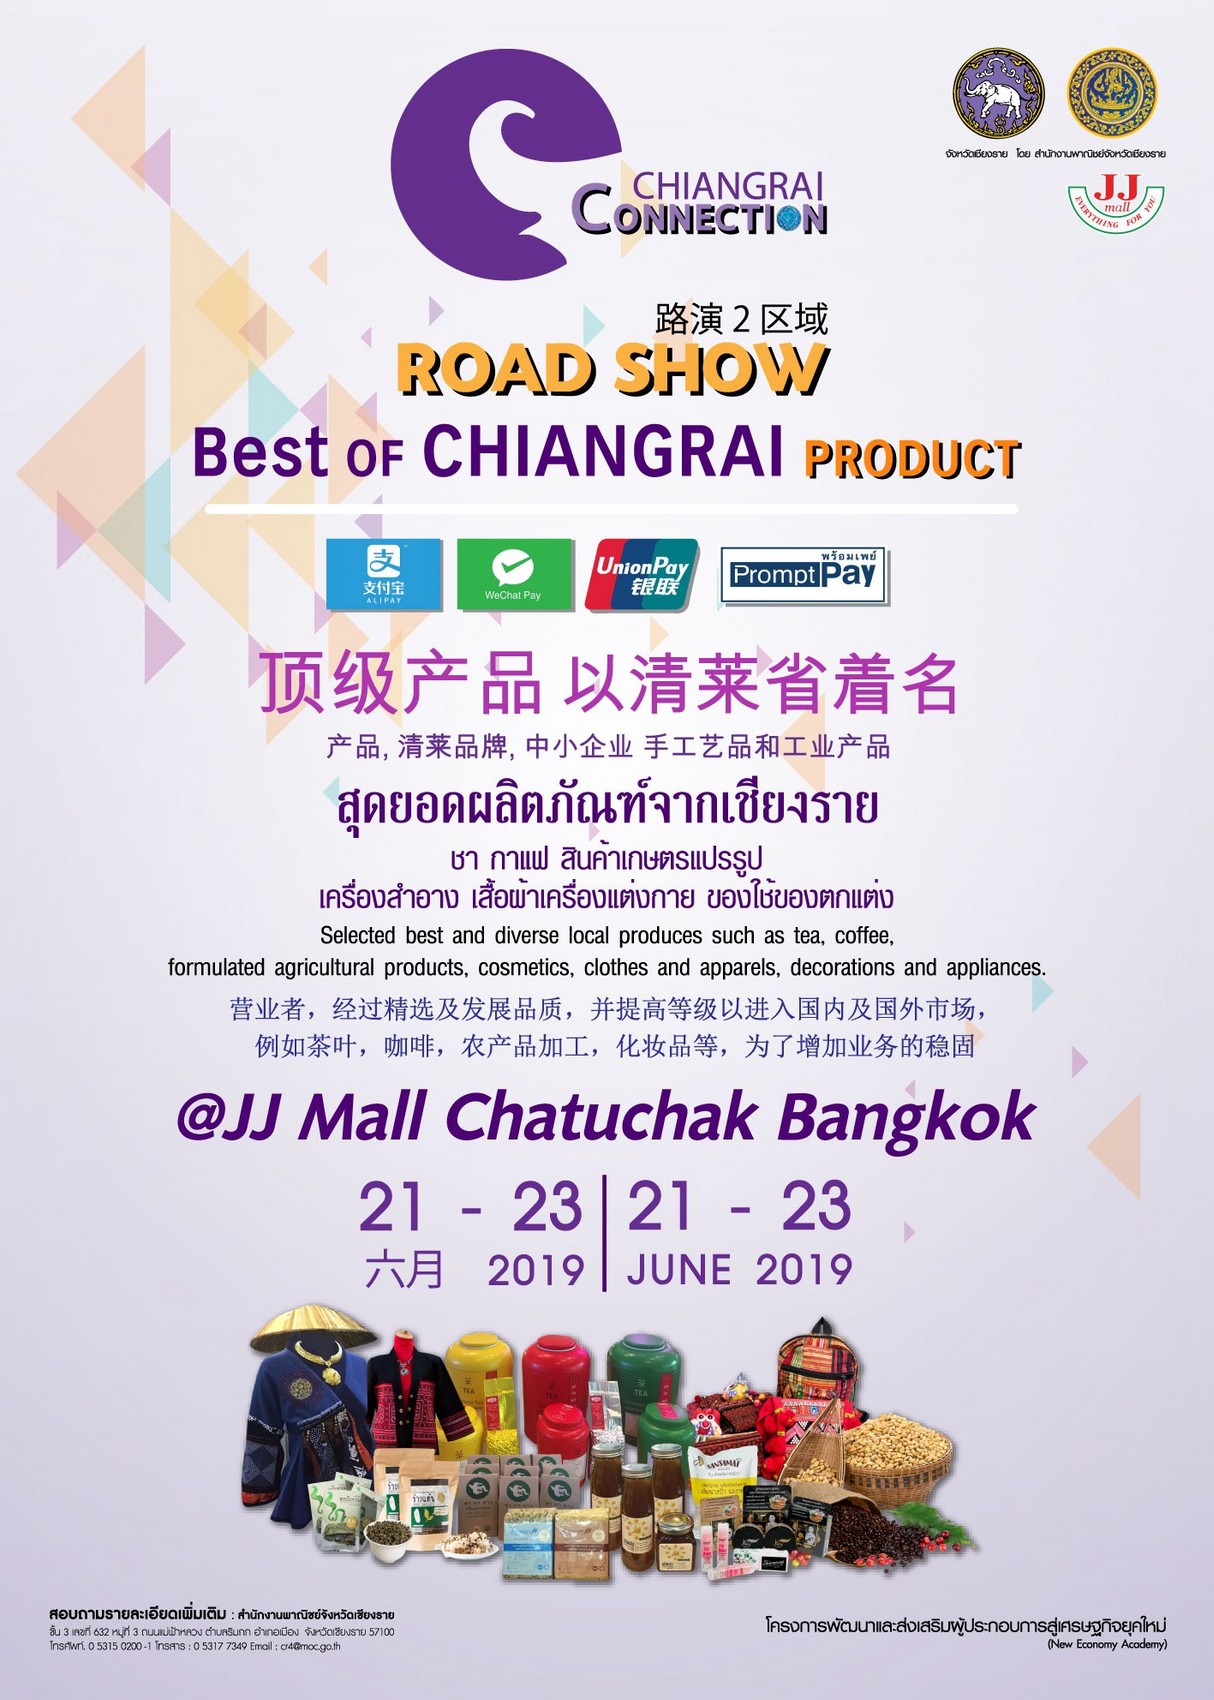 Road Show Best of Chiangrai Product